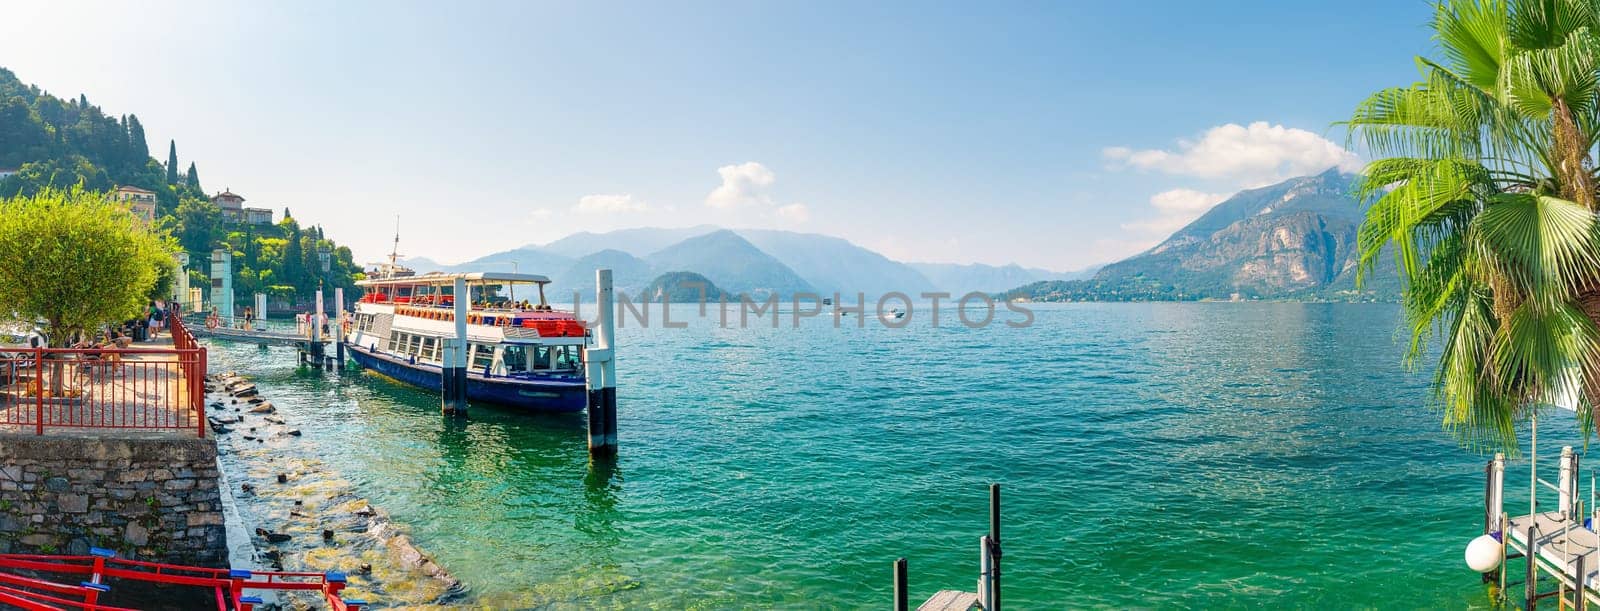 Ferry in Varenna by Givaga